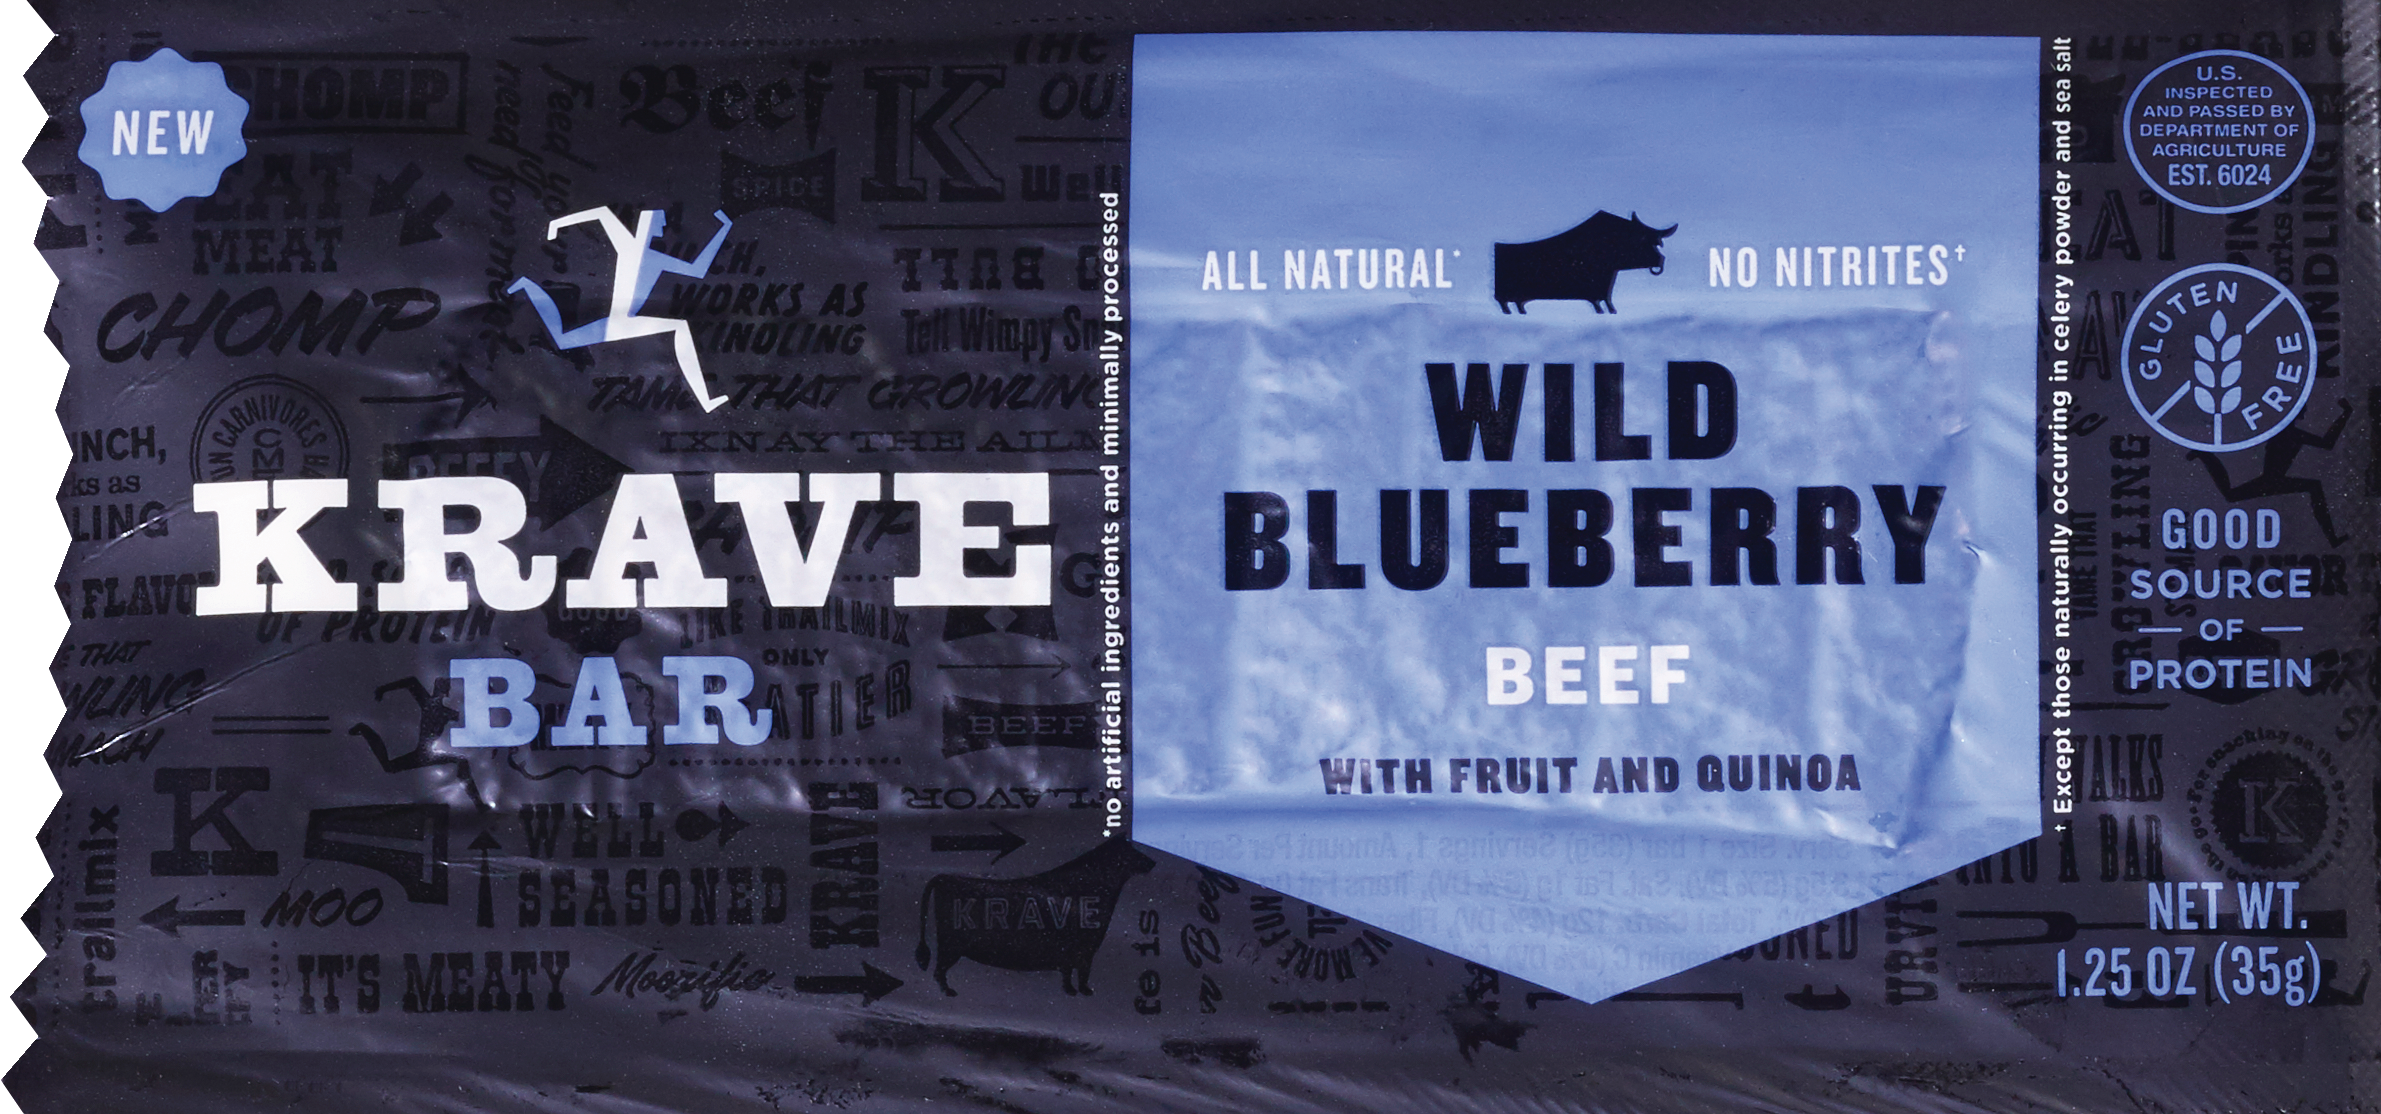 Krave Meat Bar, Blueberry Barbecue